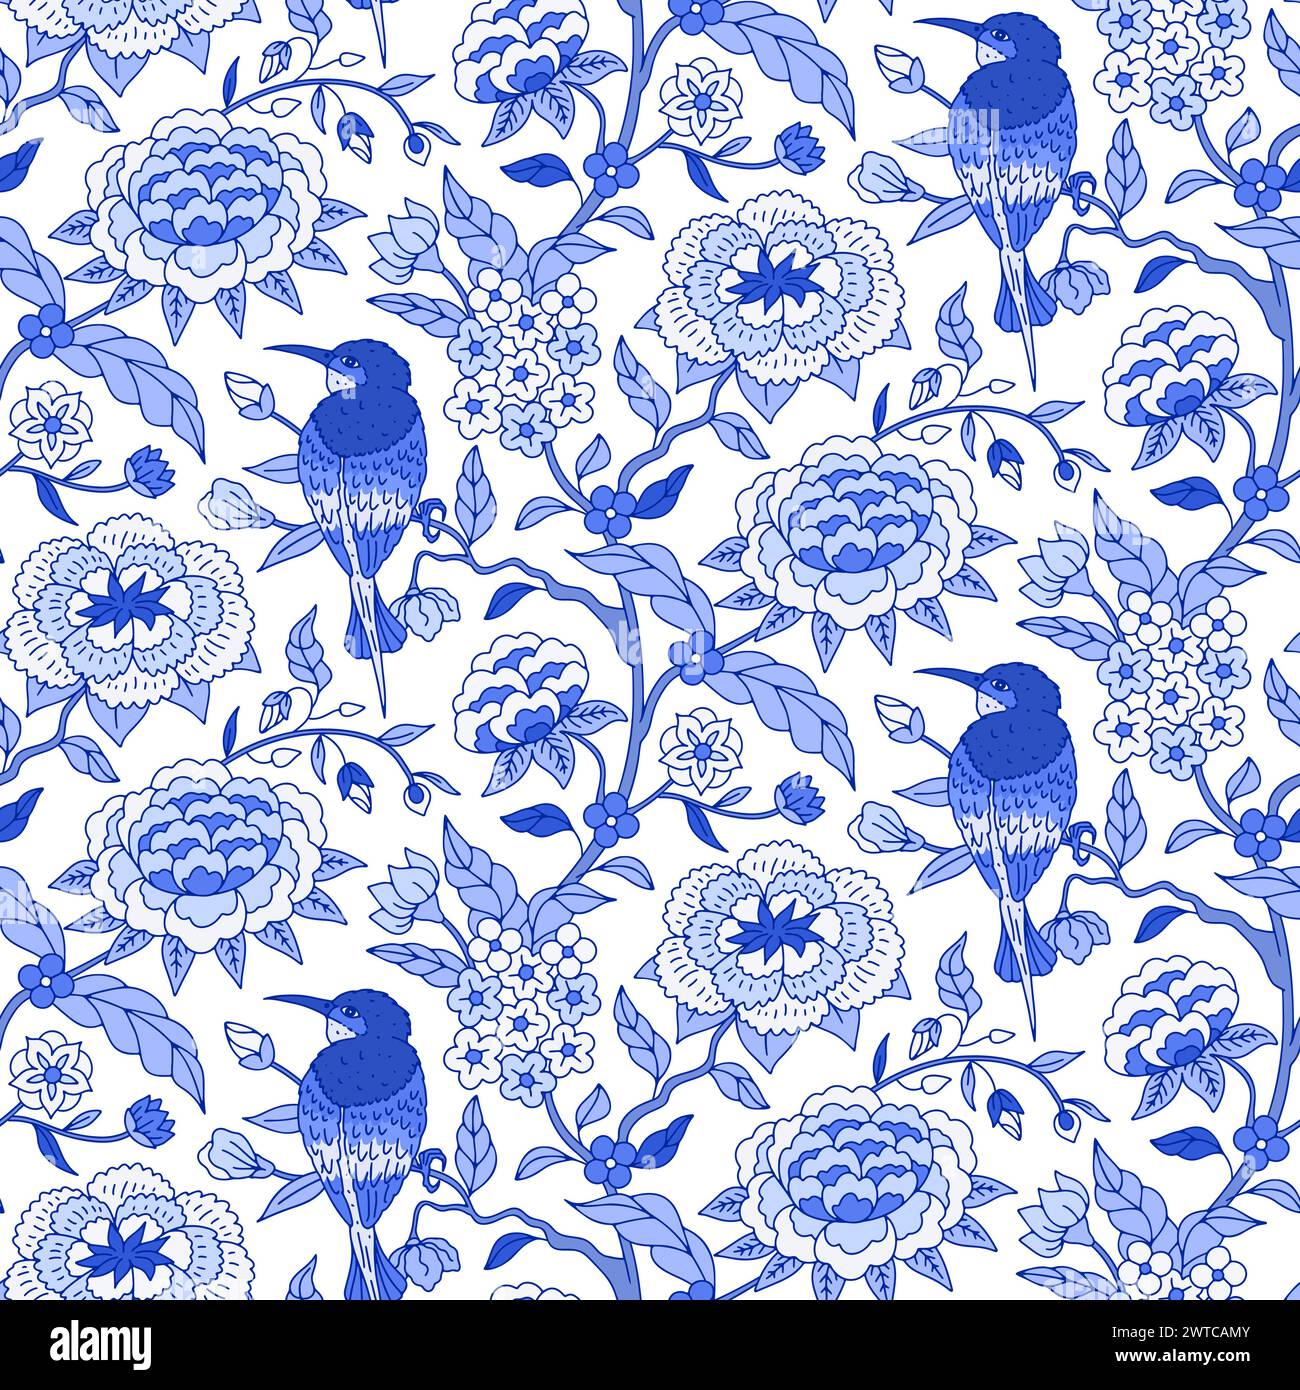 Seamless pattern with monochrome blue chinoiserie hand drawn flowers and birds motifs Stock Vector